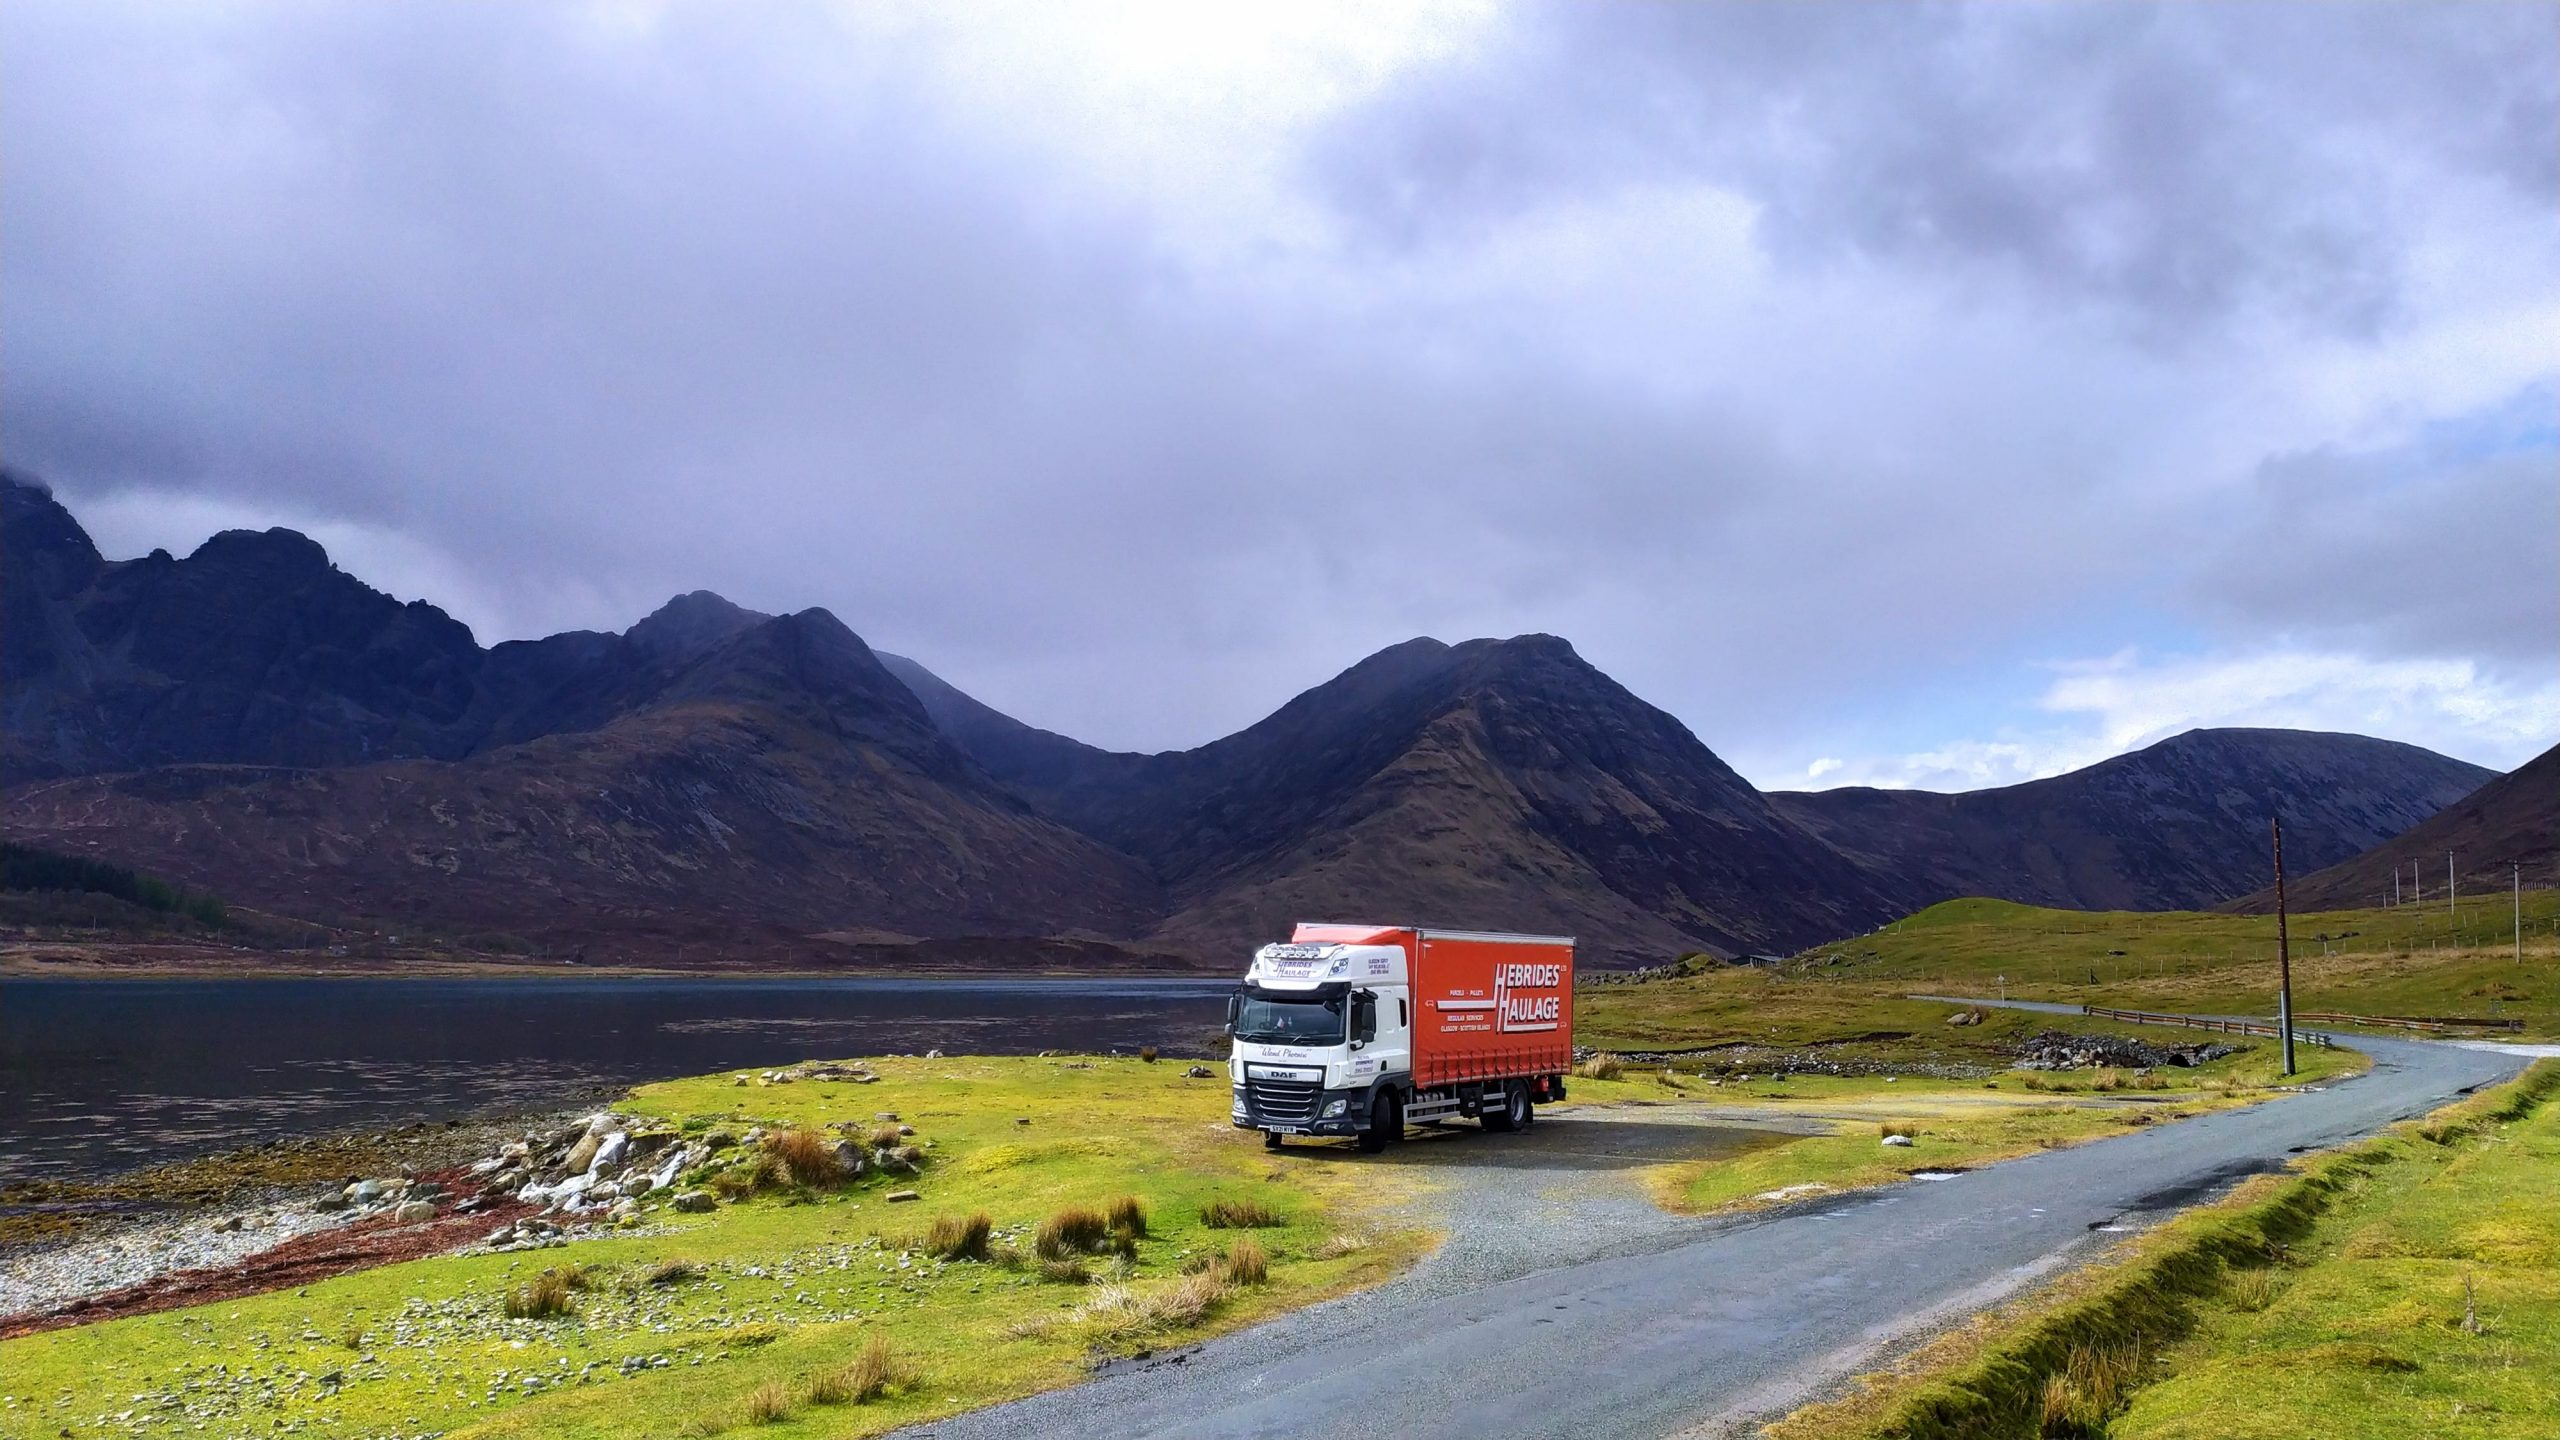 Truck parked in the Scottish Highlands with mountains in background.